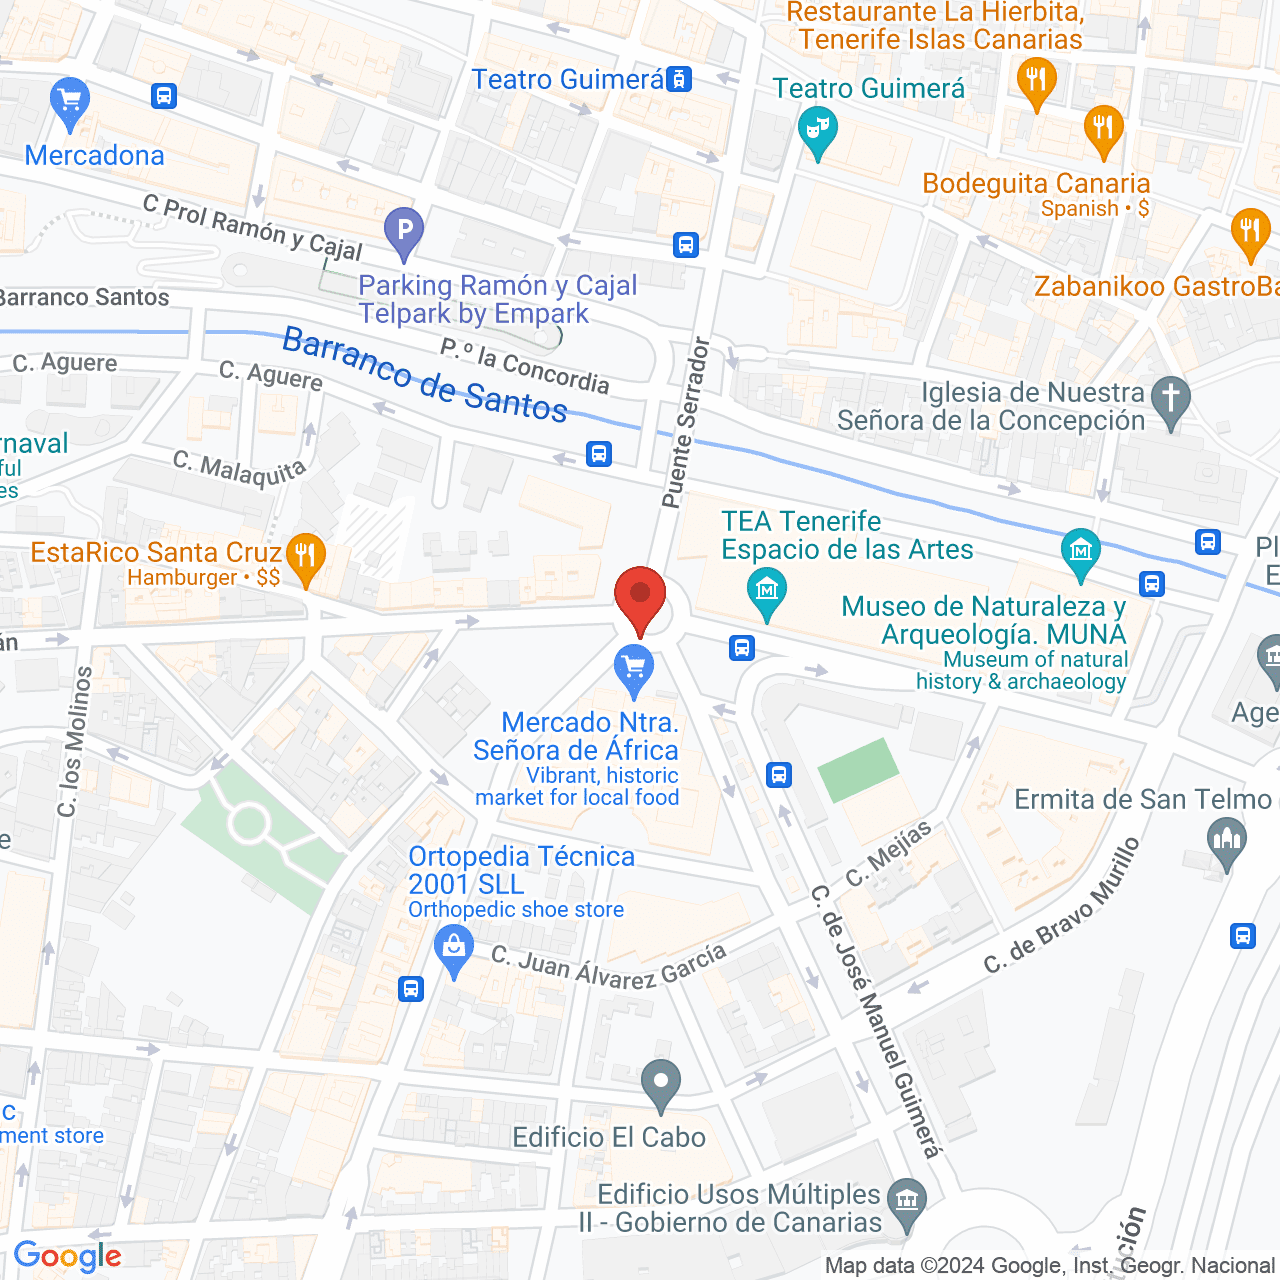 https://maps.googleapis.com/maps/api/staticmap?zoom=10&maptype=hybrid&scale=4&center=28.4636296,-16.2518467&markers=color:red%7C%7C28.4636296,-16.2518467&size=1000x1000&key=AIzaSyAQg6Liu52-a7wn17F9B-5c4QmJ9kTO3Mo